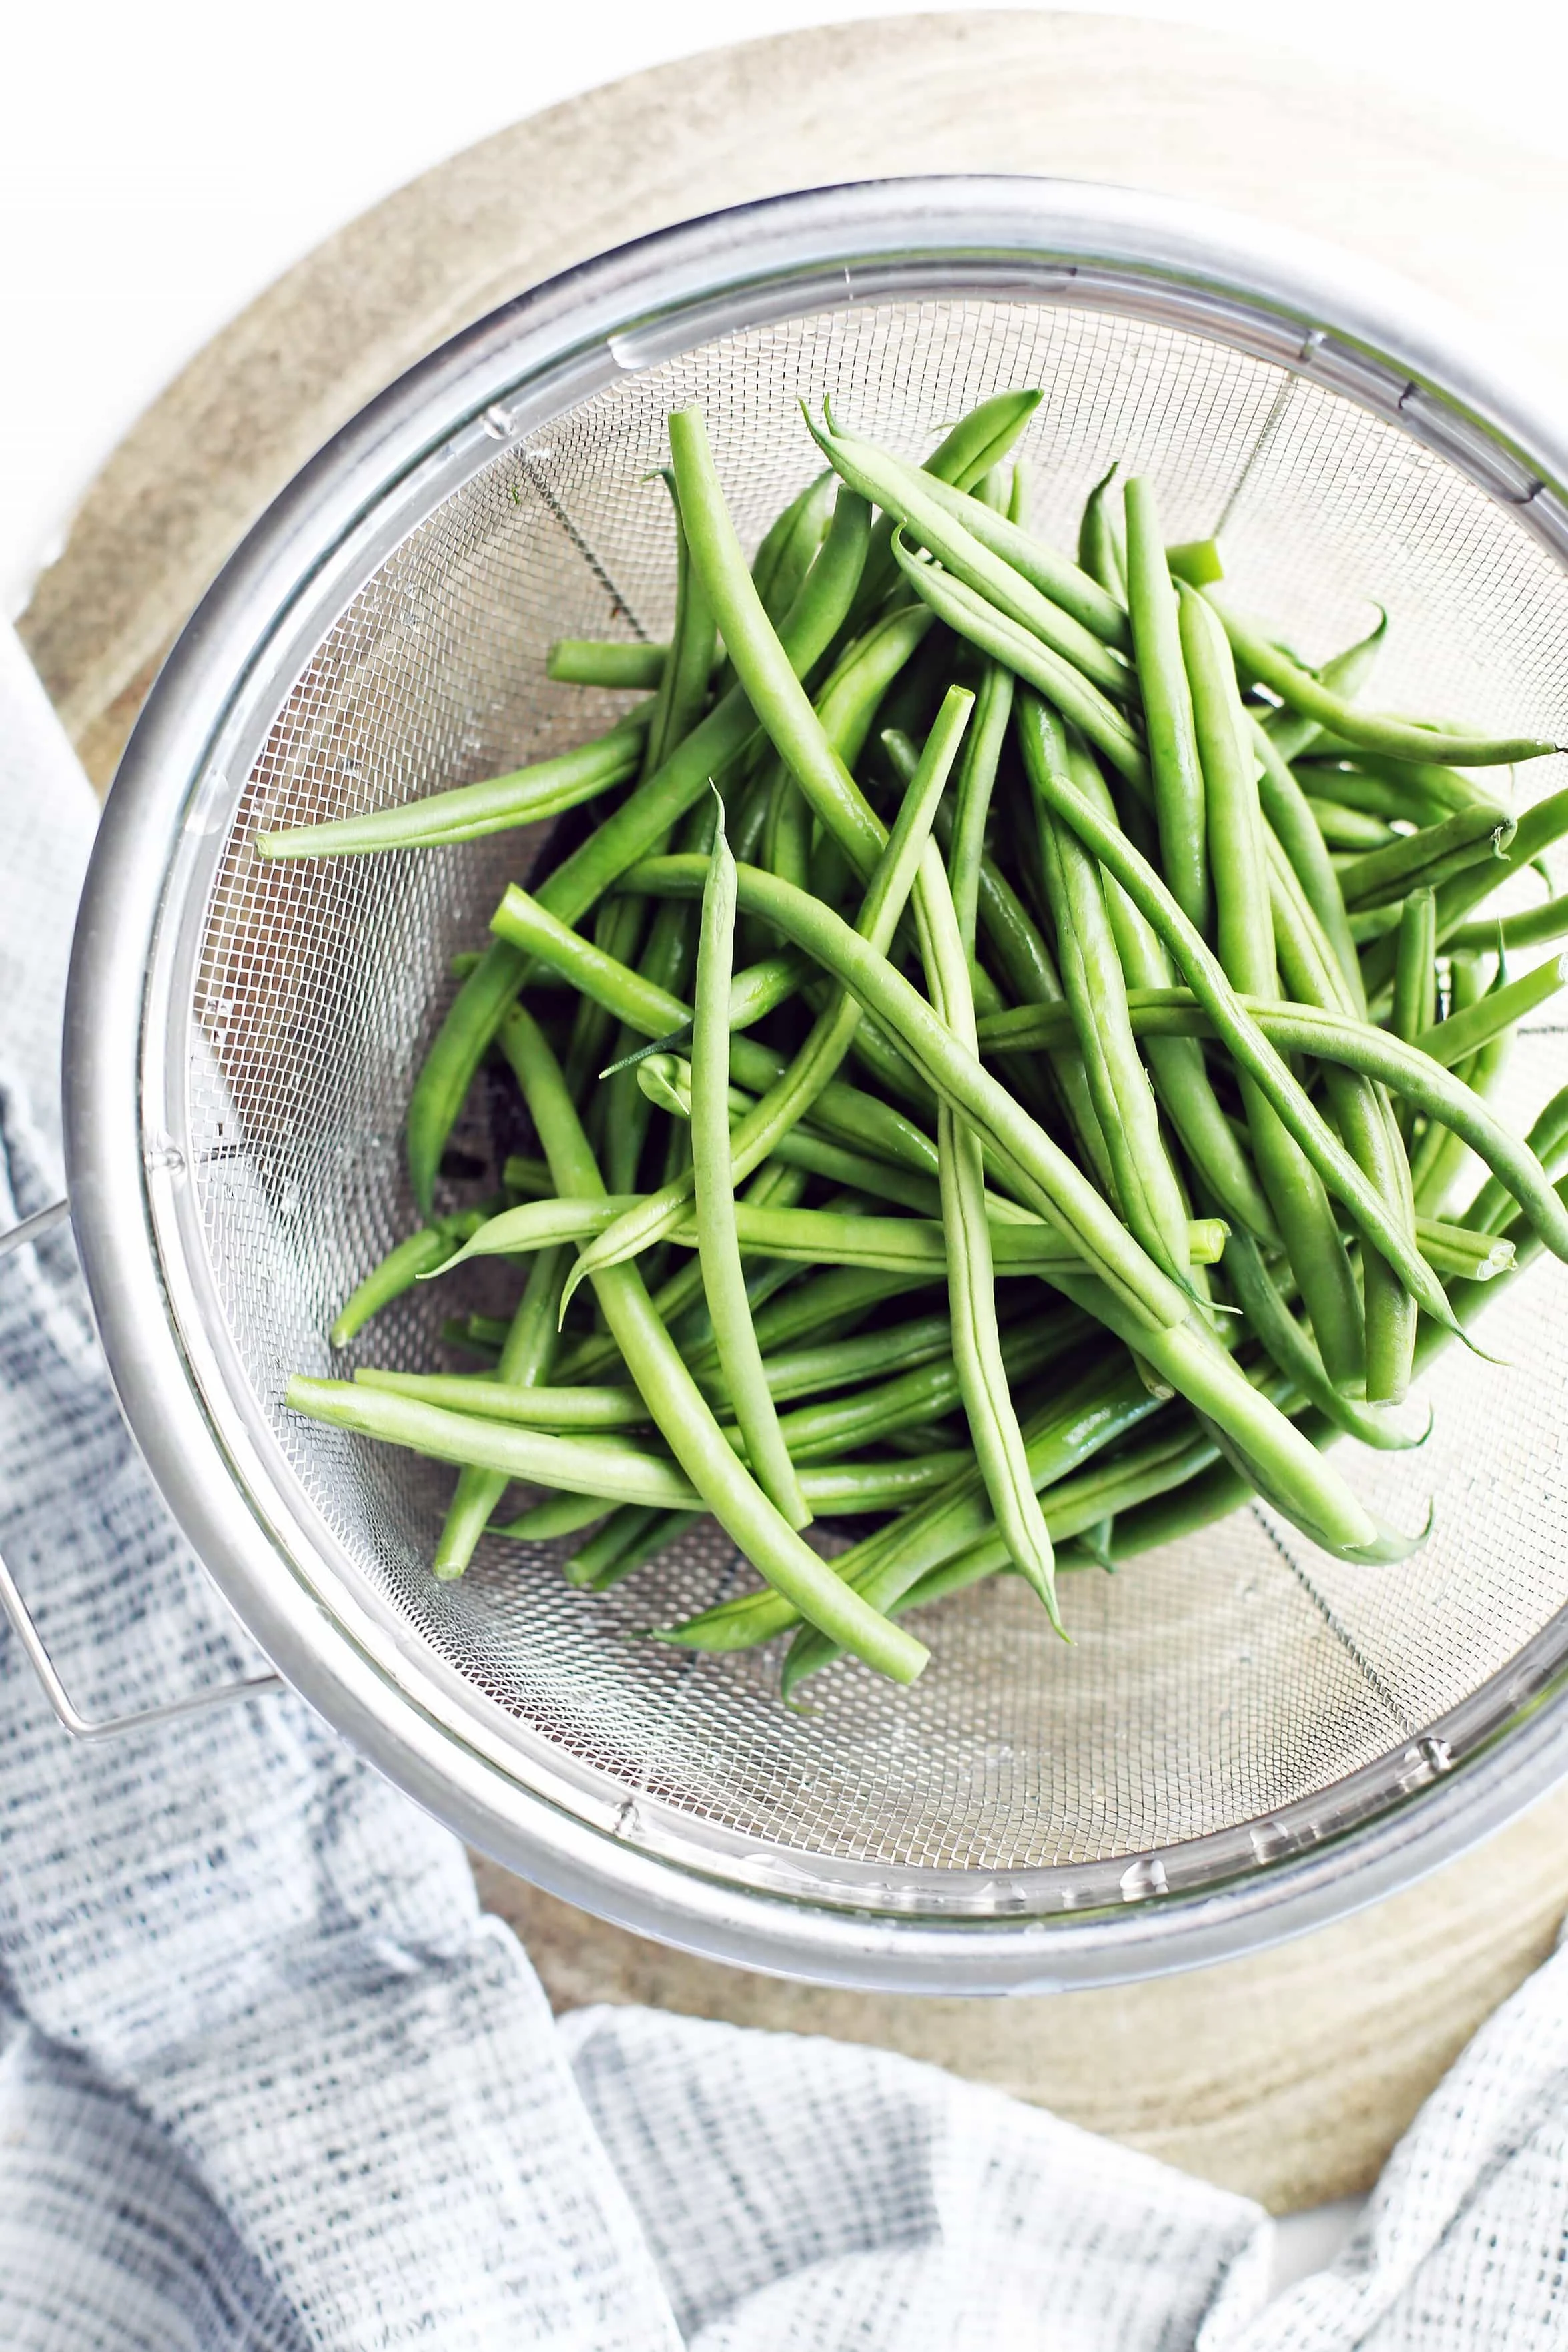 Overhead view of rinsed and trimmed French green beans in large metal mesh strainer.